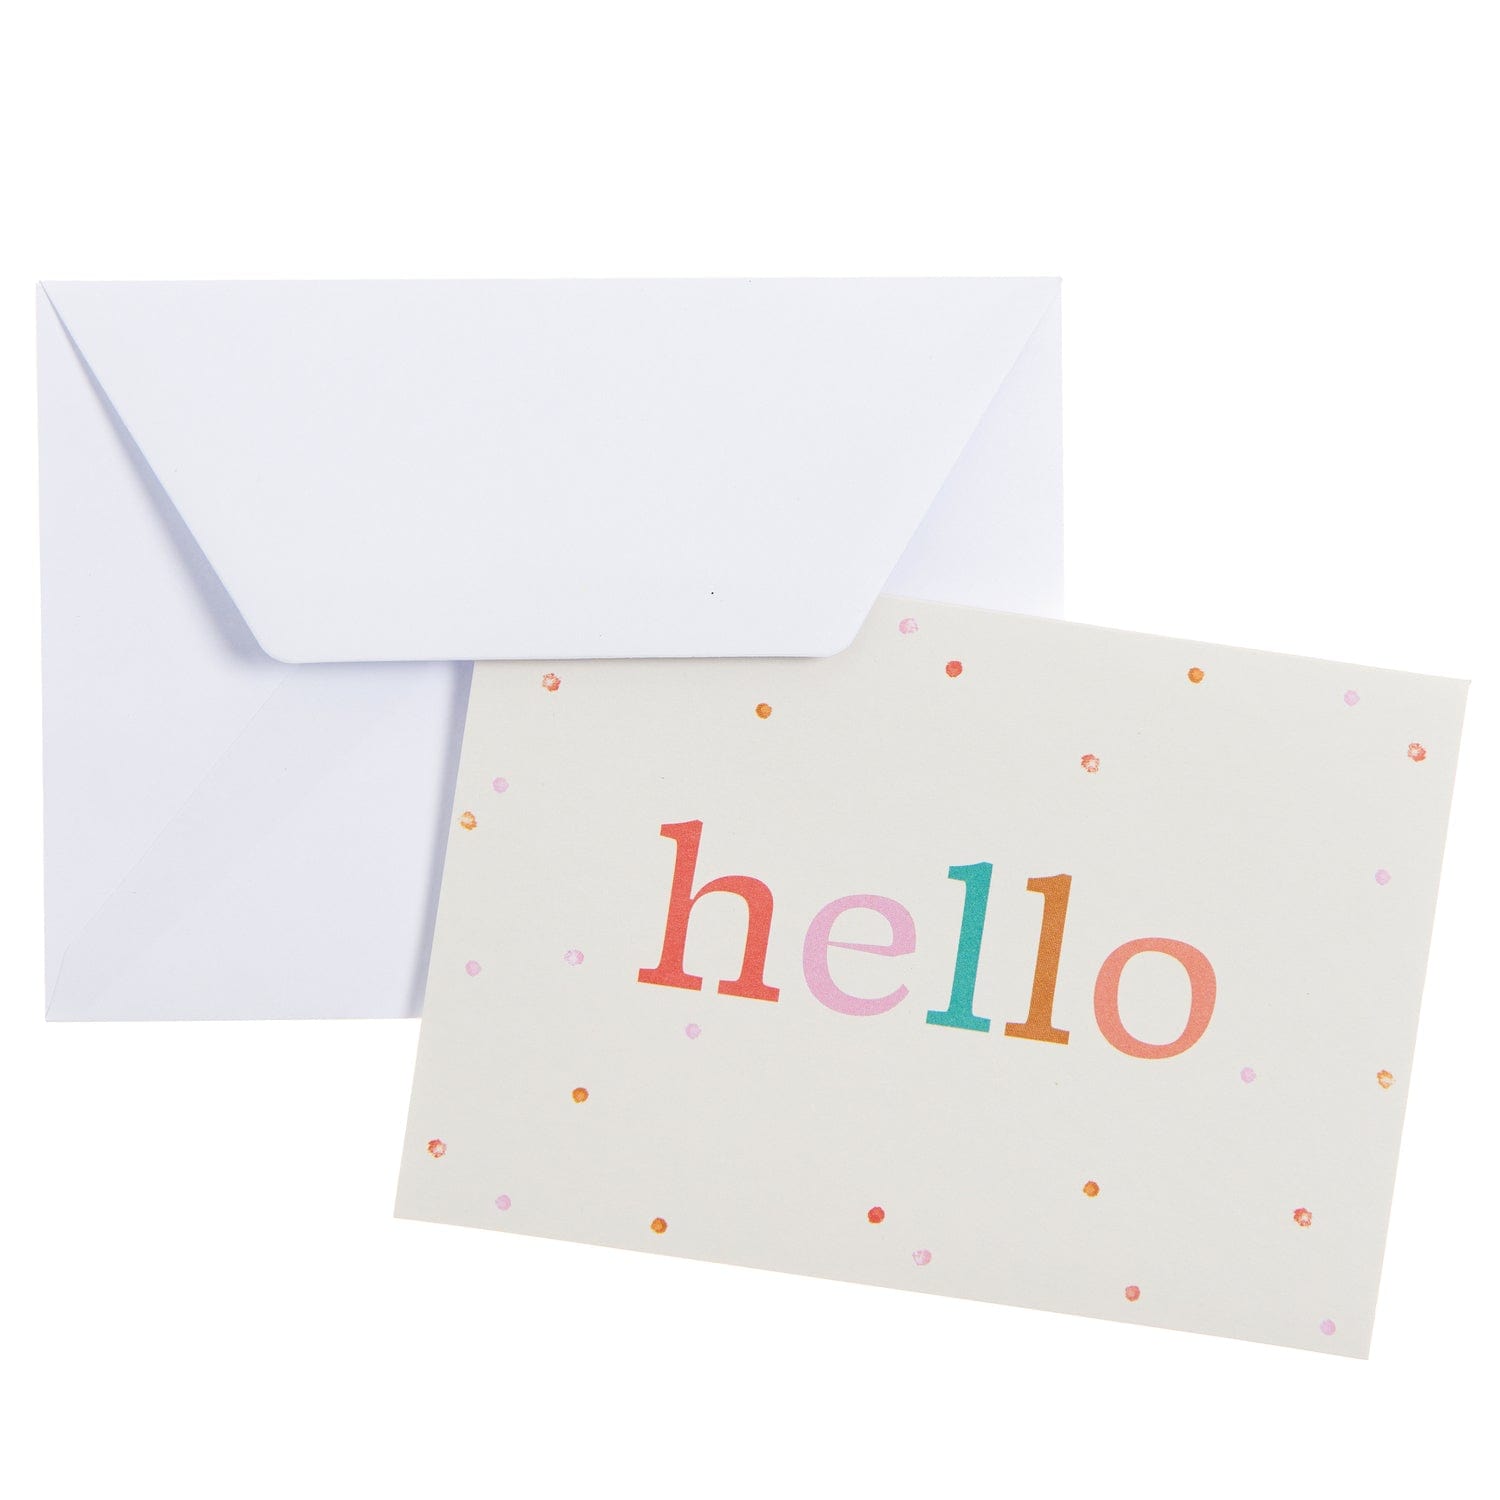 Hello Note Cards - 15 Count Gartner Studios Note Cards